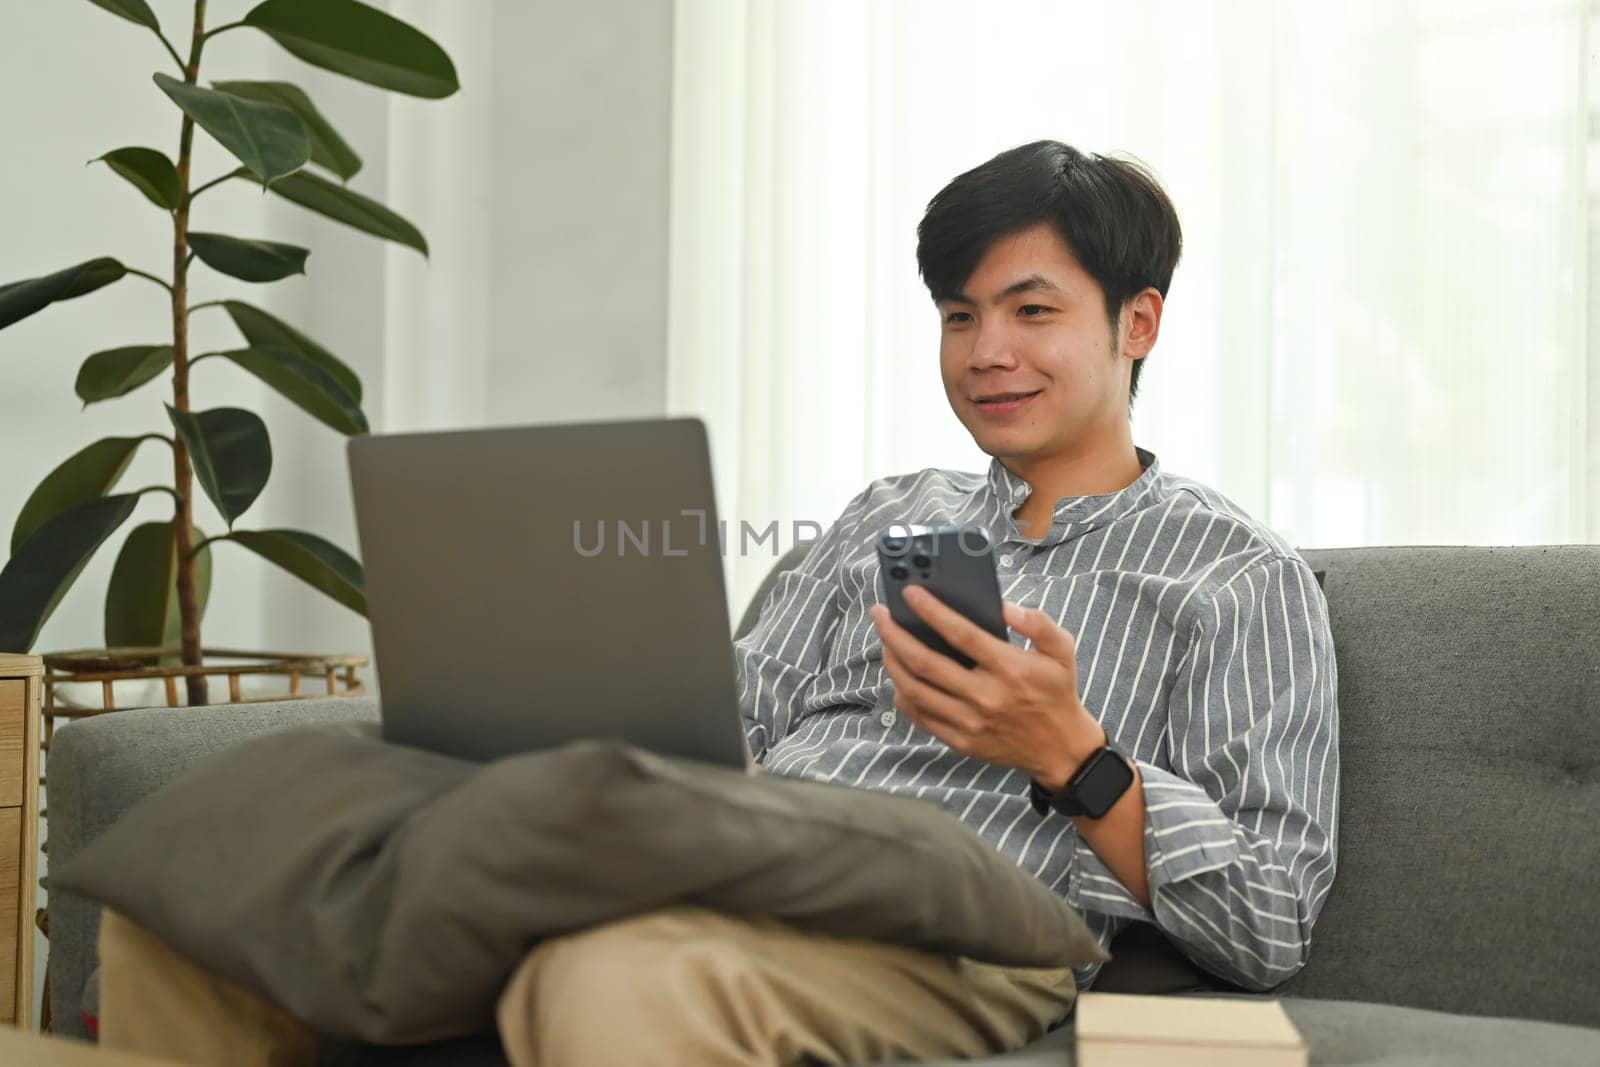 Cheerful asian man hand holding mobile phone and looking at laptop screen. People, technology and lifestyle concept.